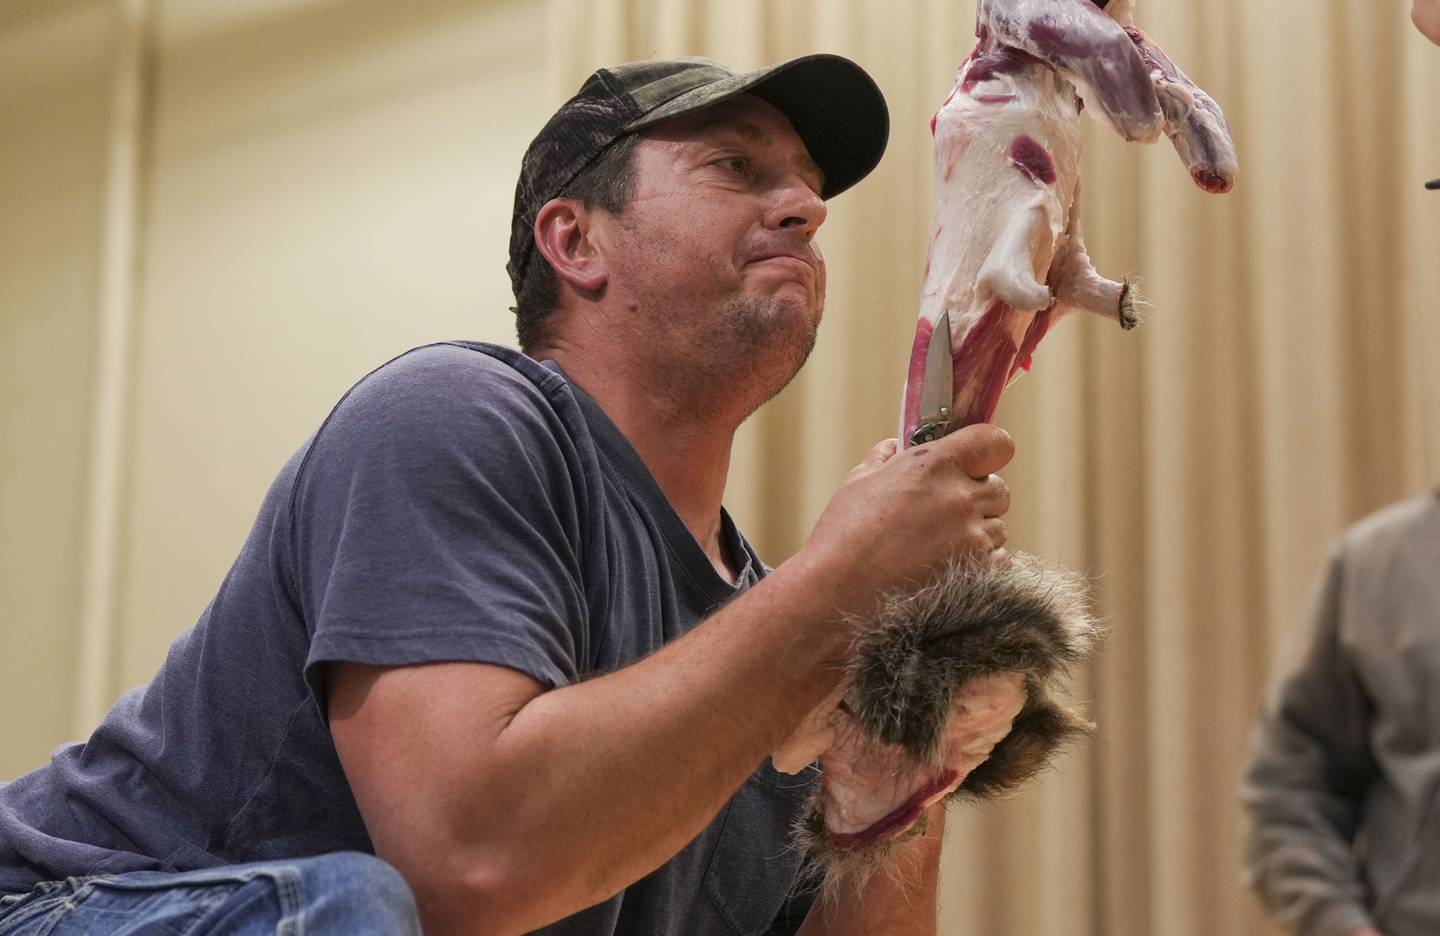 Mike Haas rips the pelt from a raccoon during the senior raccoon skinning competition.